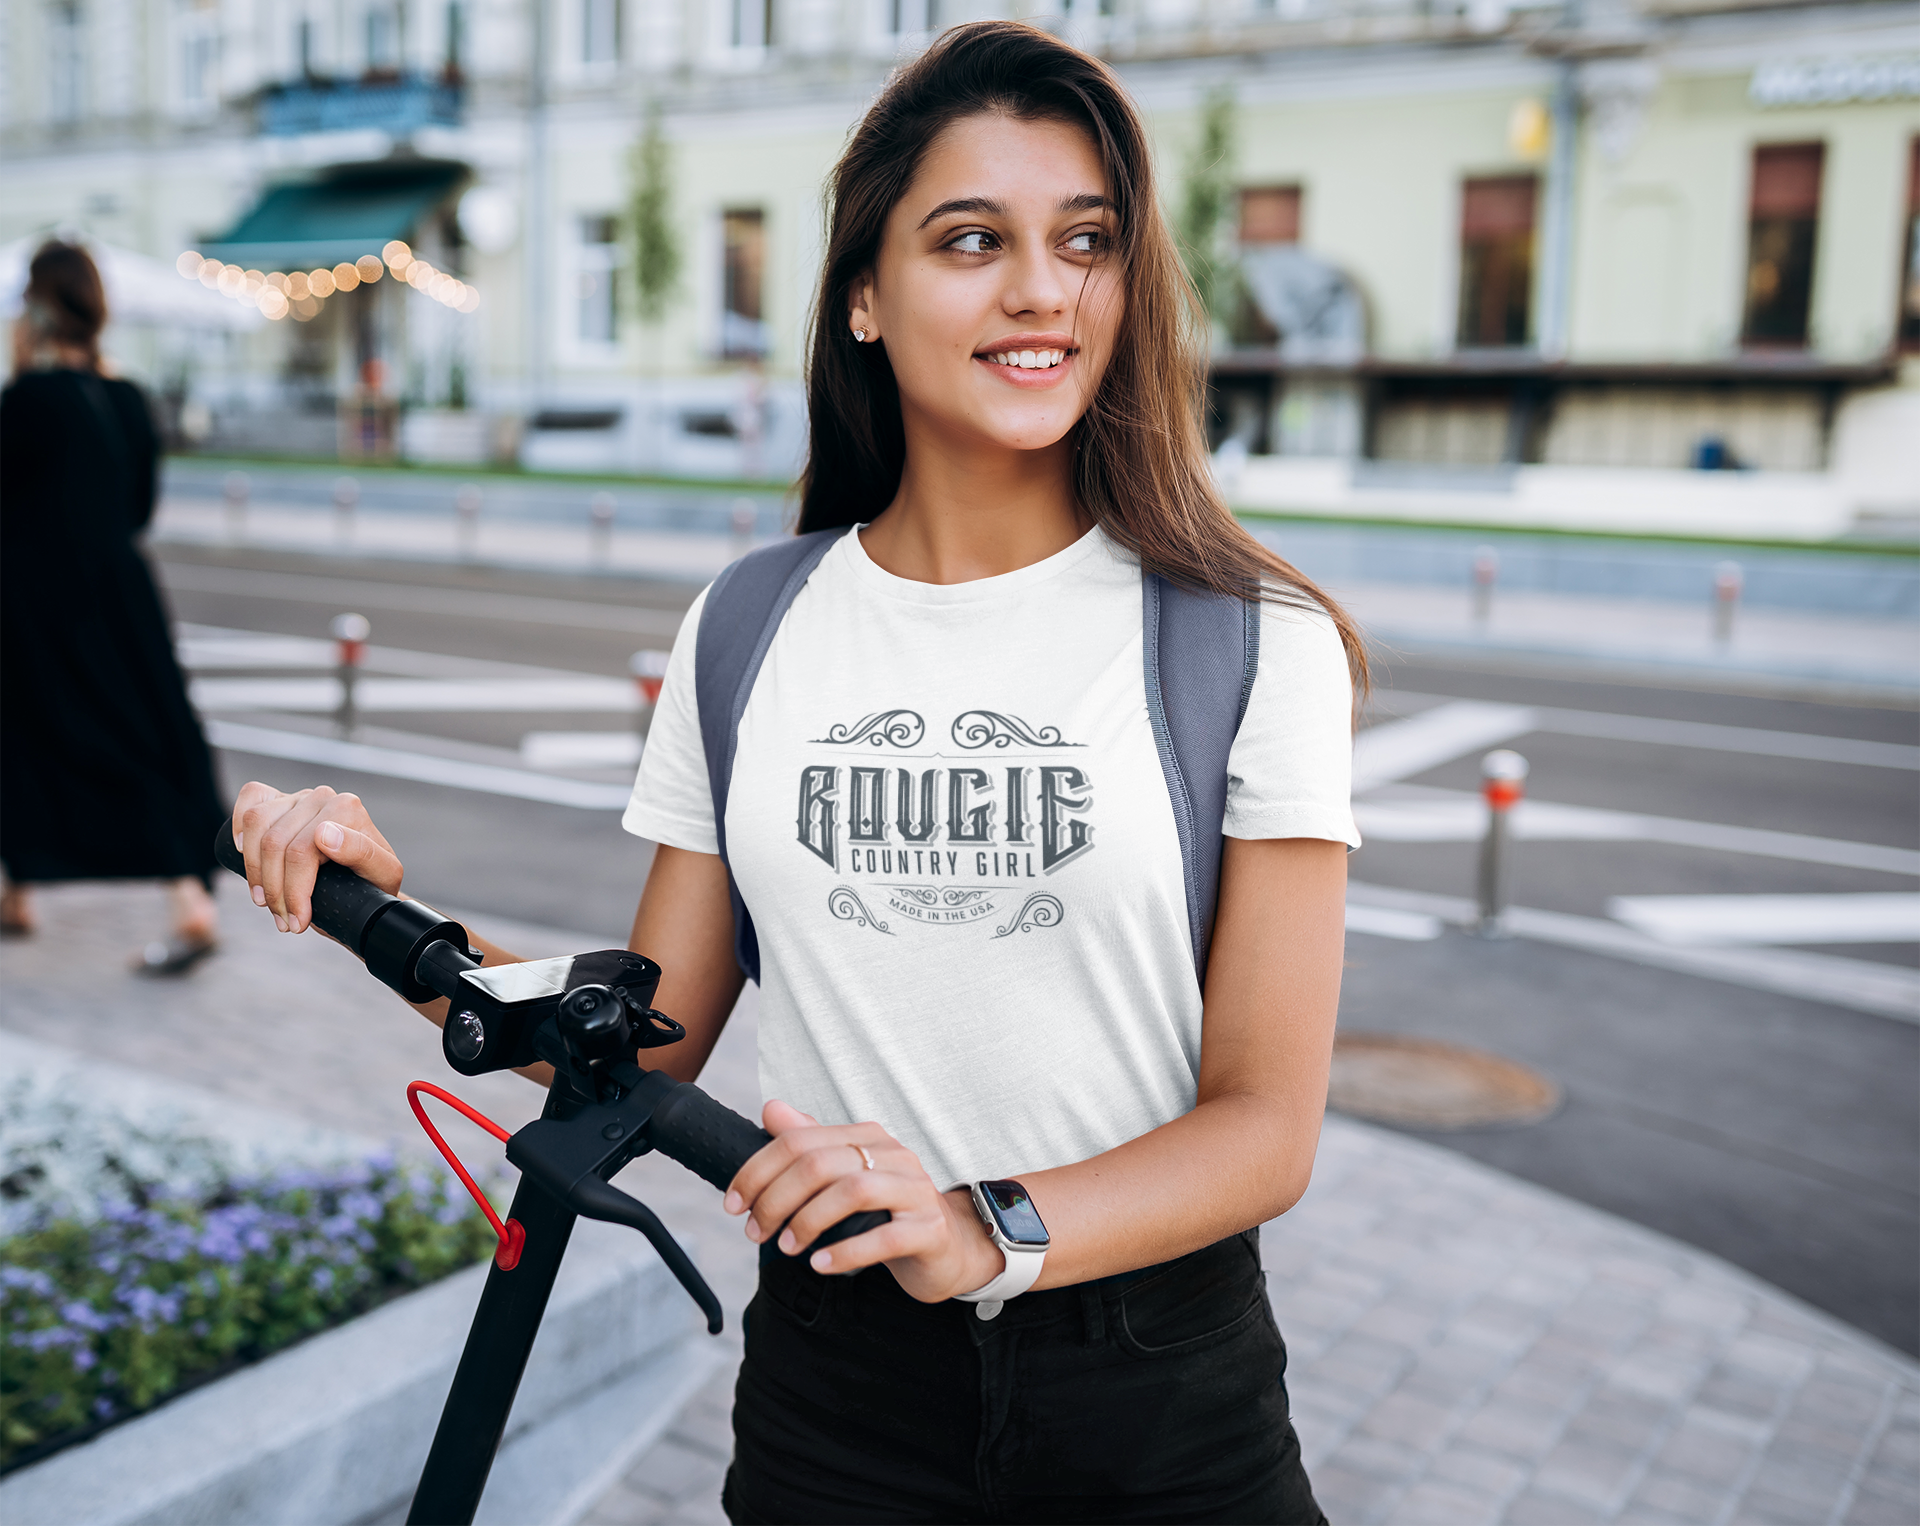 Bougie Country Girl (Logo) - Simple Logo T-Shirt for Country Girls